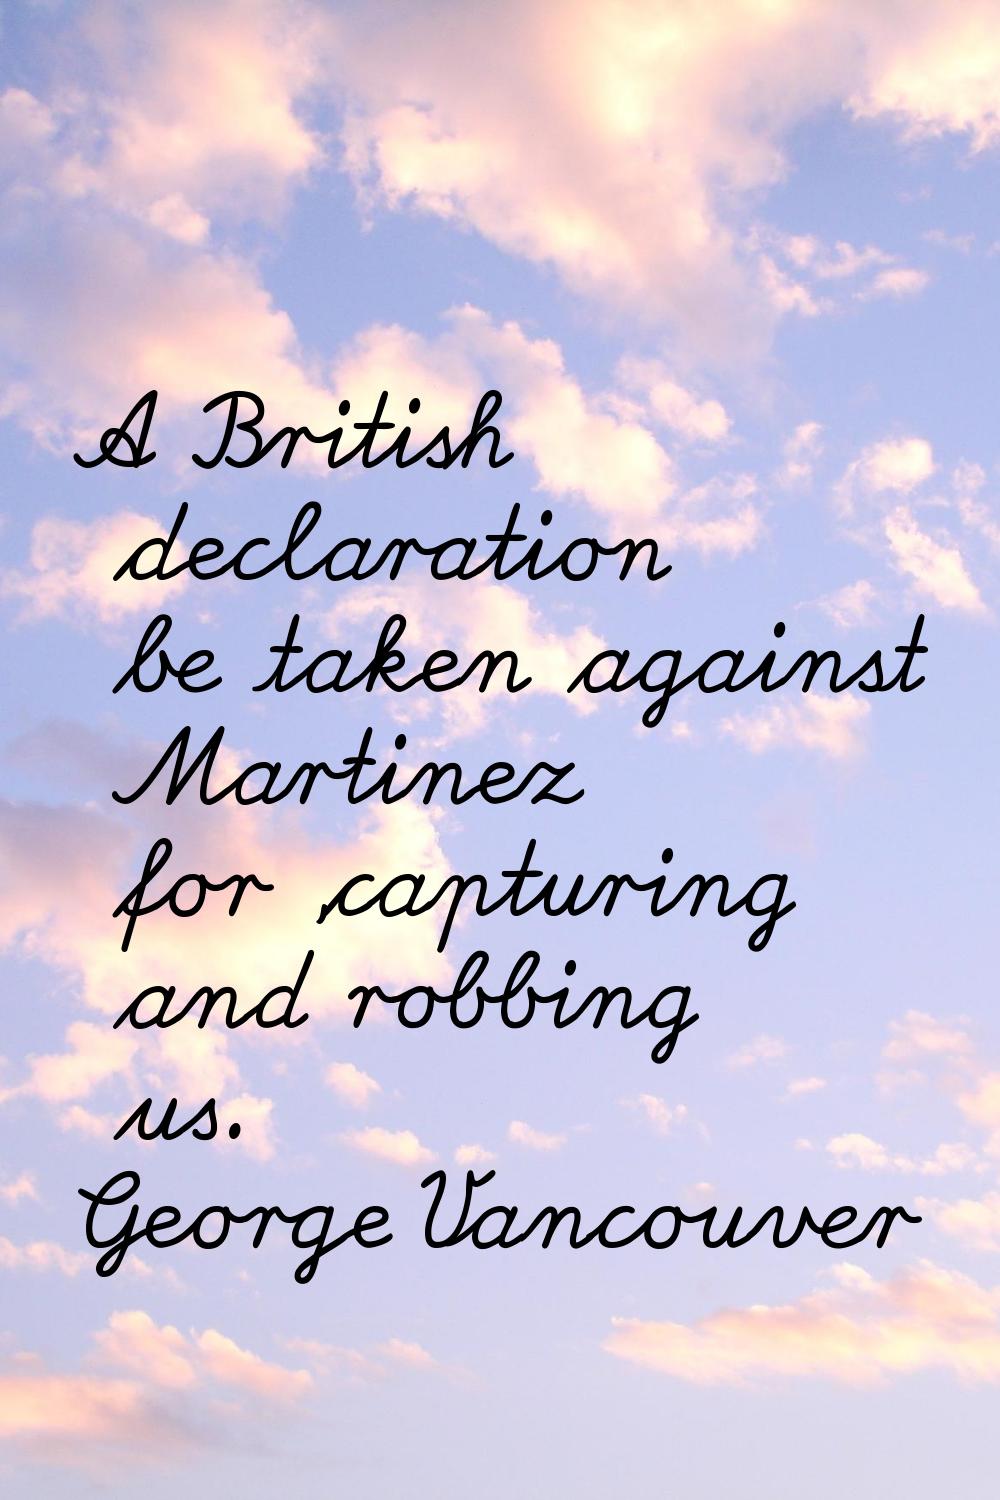 A British declaration be taken against Martinez for 'capturing and robbing us.